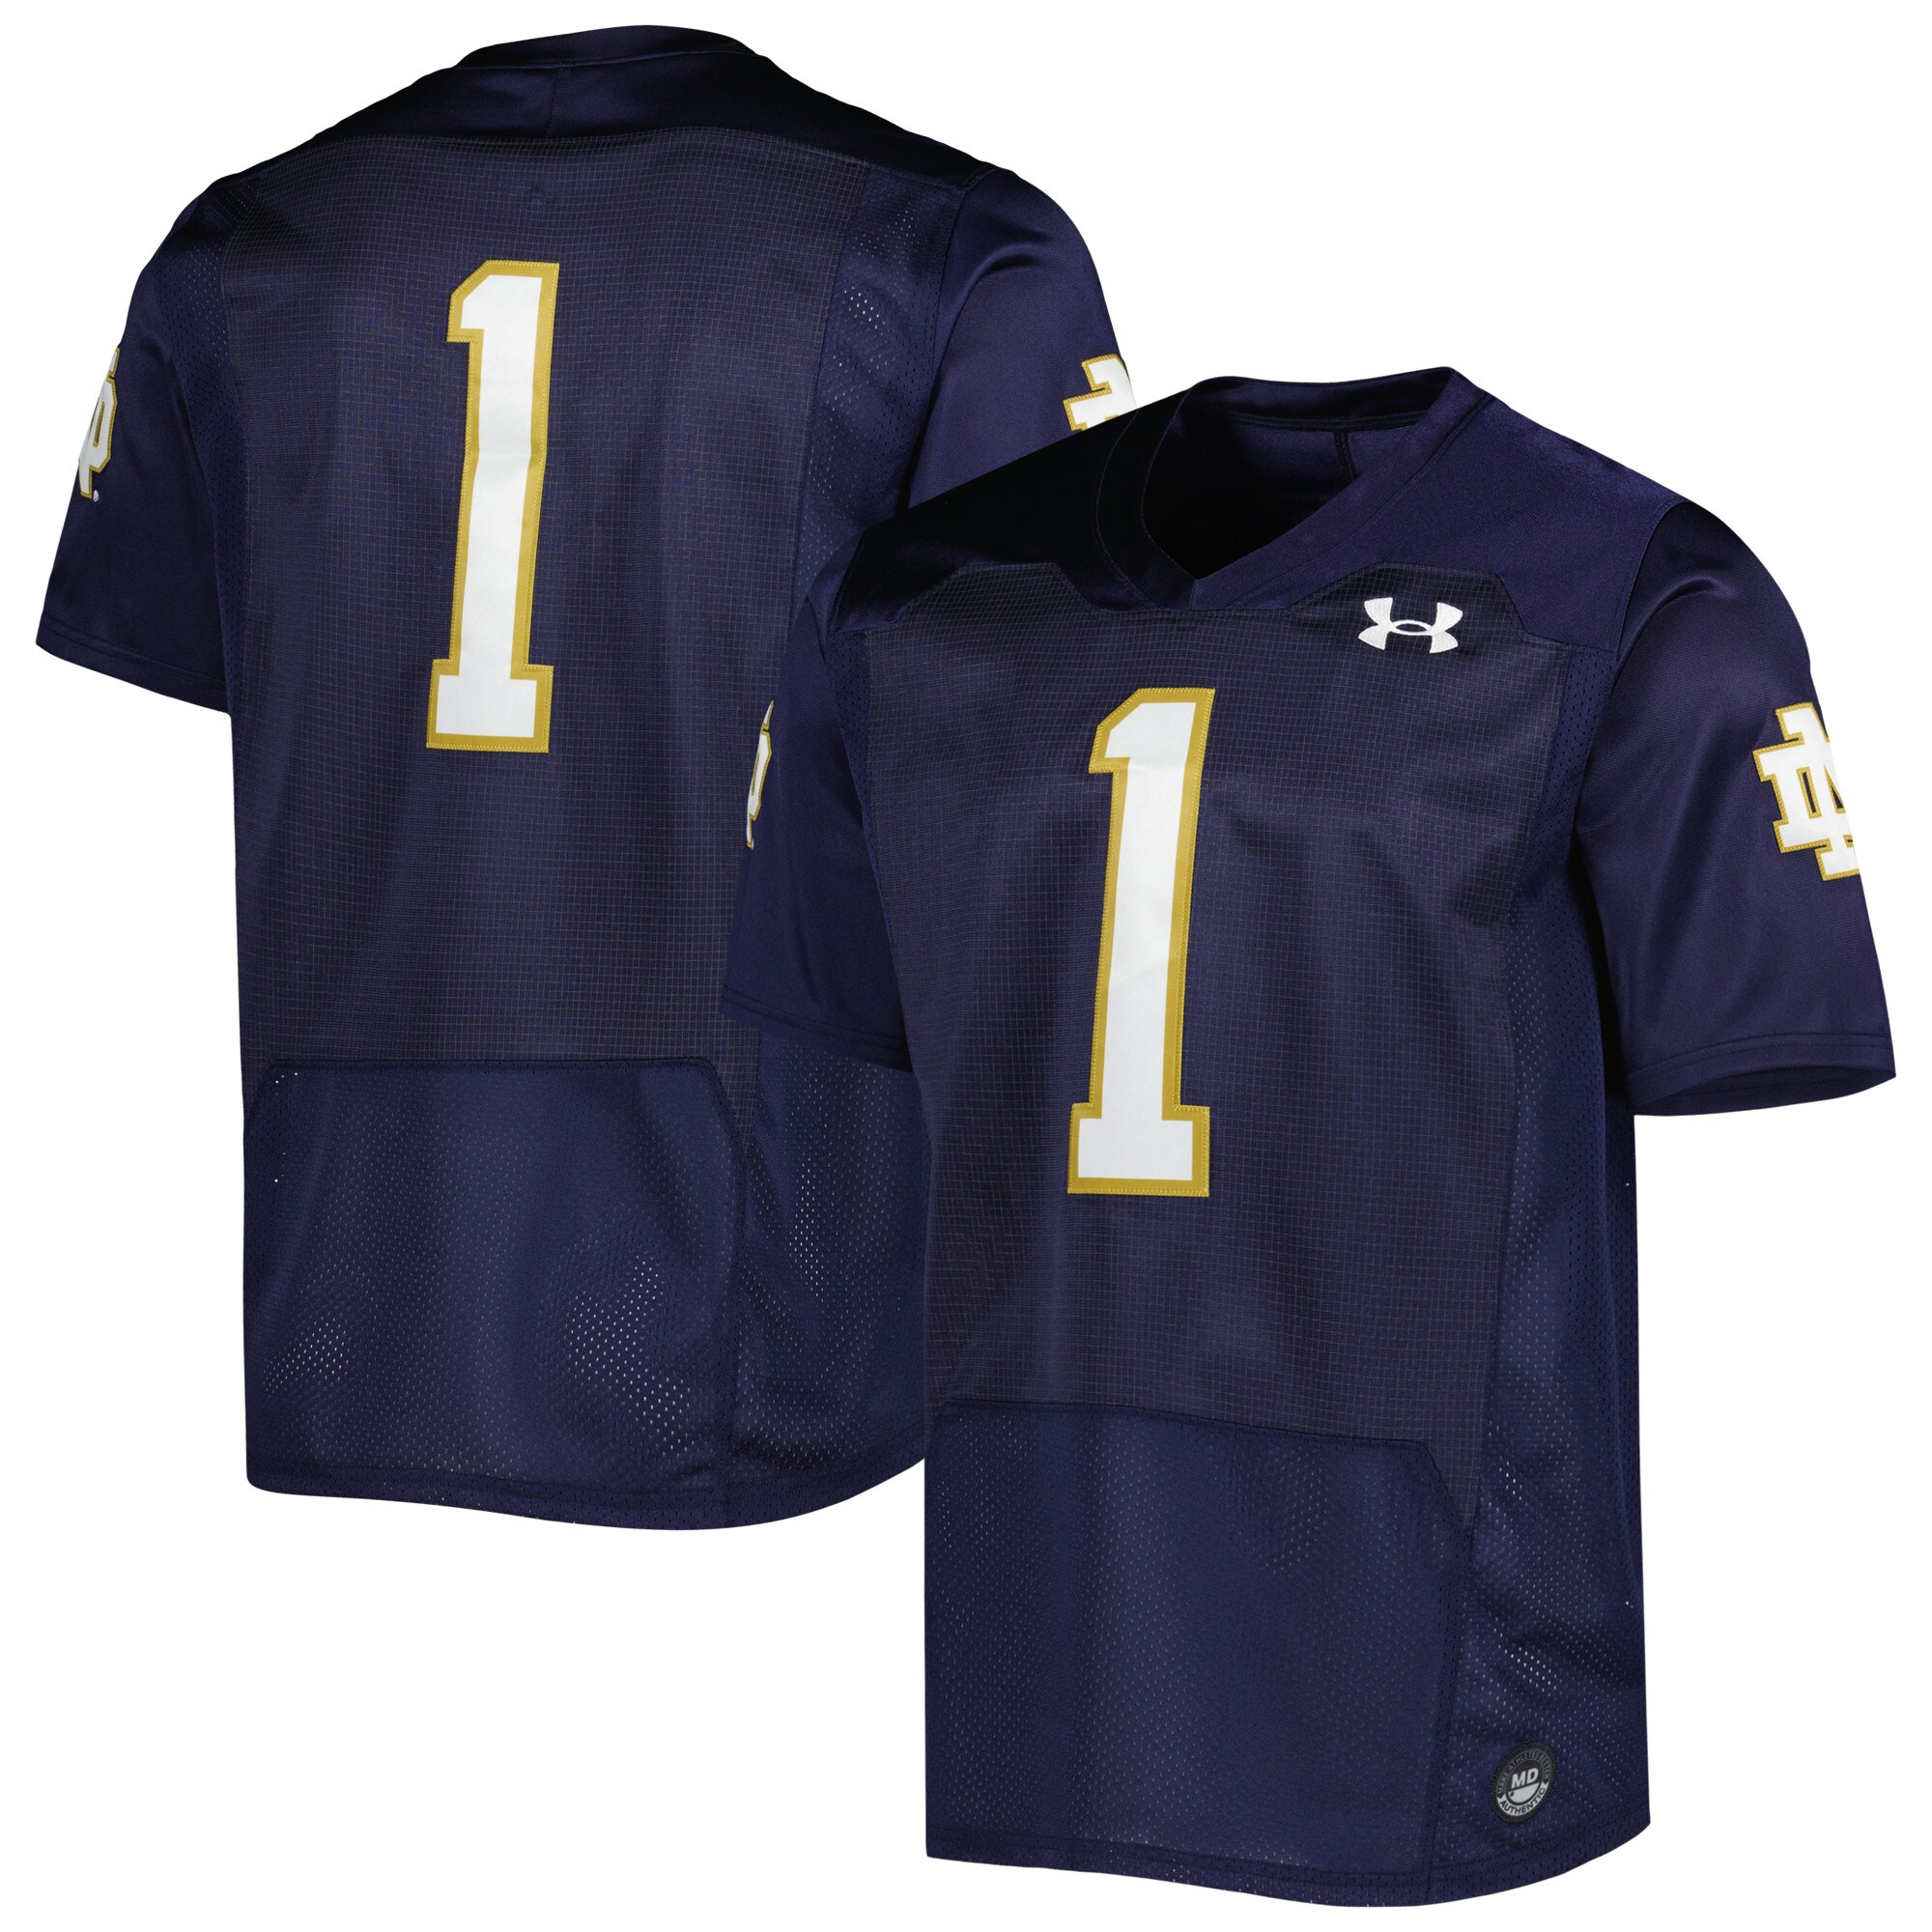 #1 Notre Dame Fighting Irish Under Armour Premier Limited Jersey - Navy For Youth Women Men